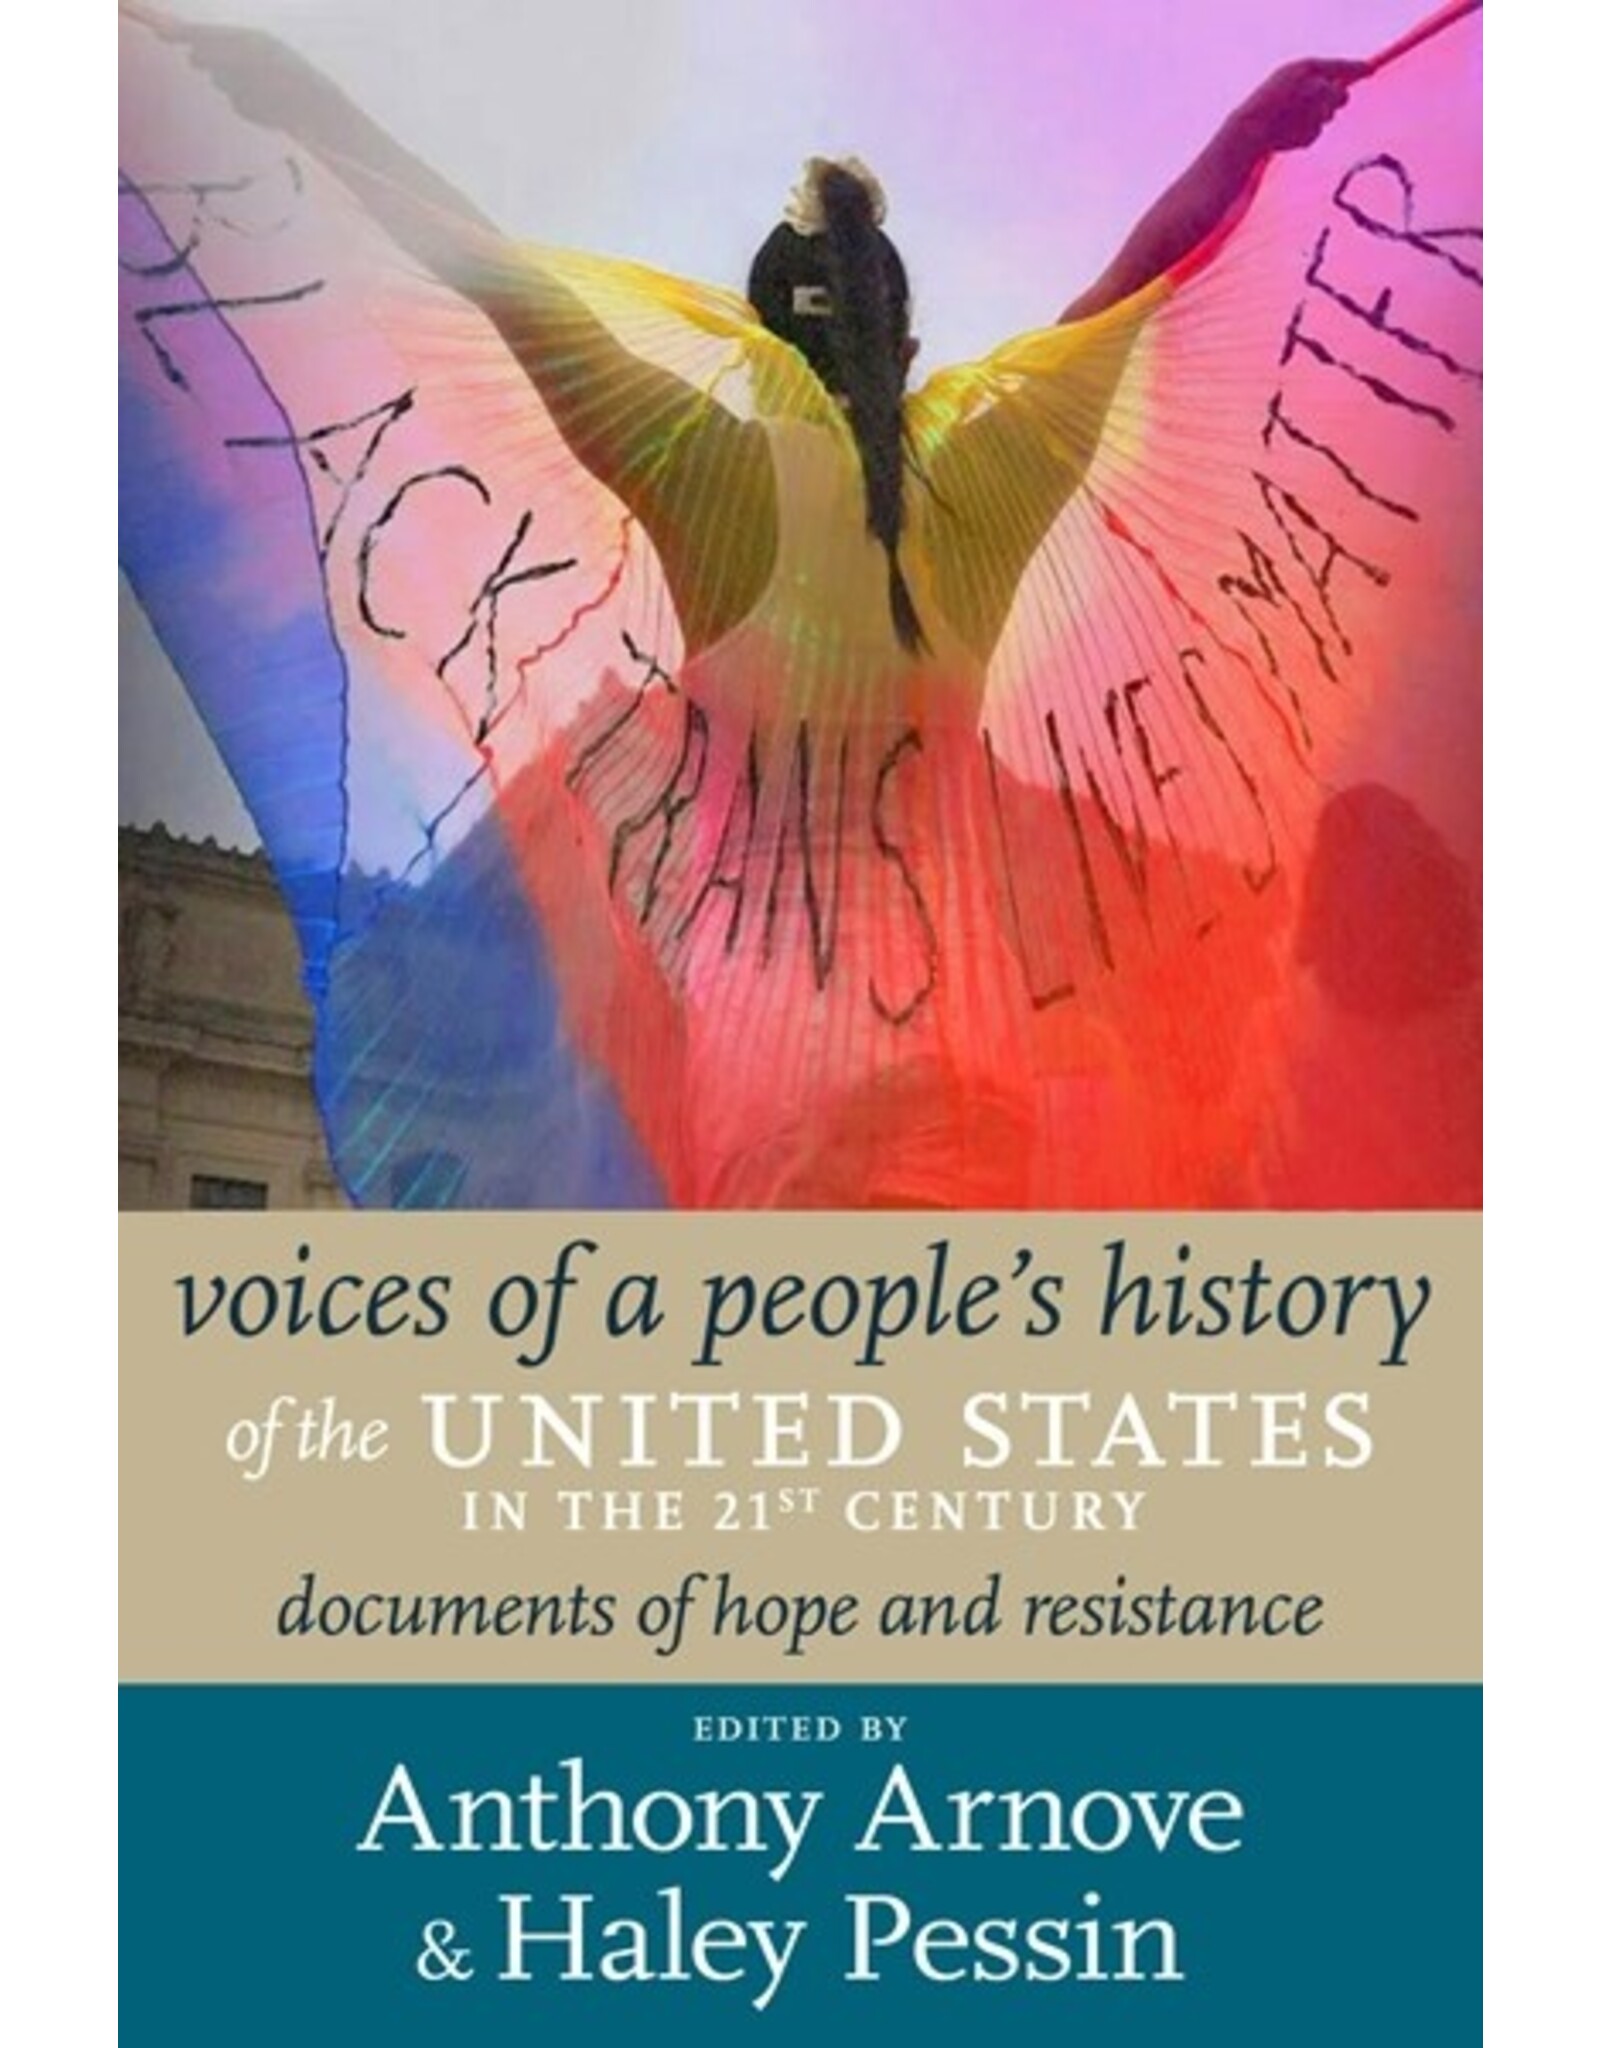 Books Voices of a people's history of the United States in the 21st Century by Anthony Arnove & Haley Pessin